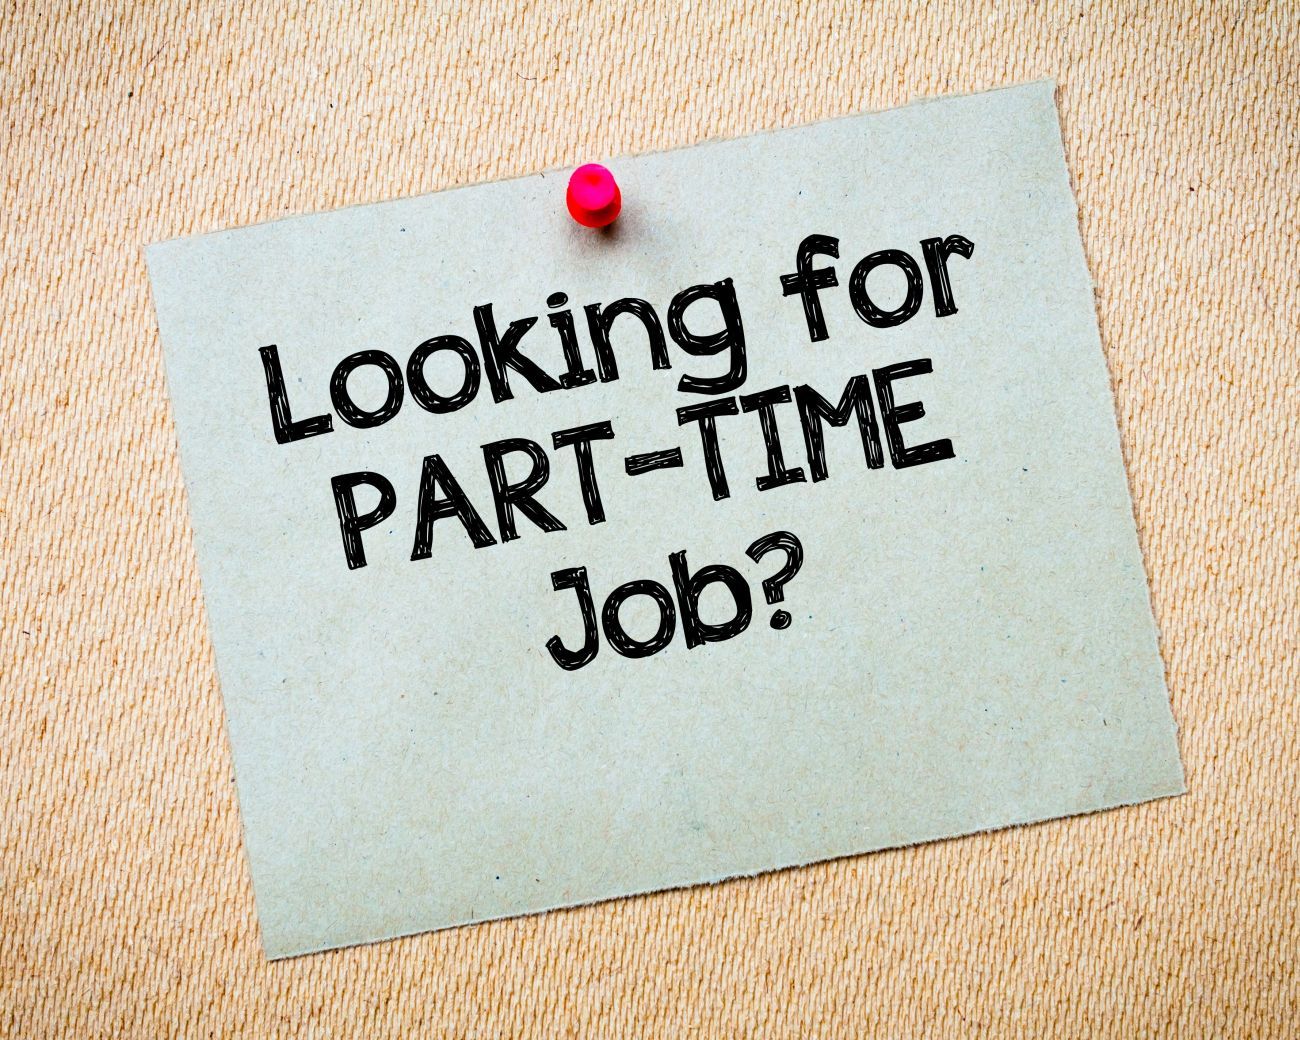 Part time evening jobs in west sussex